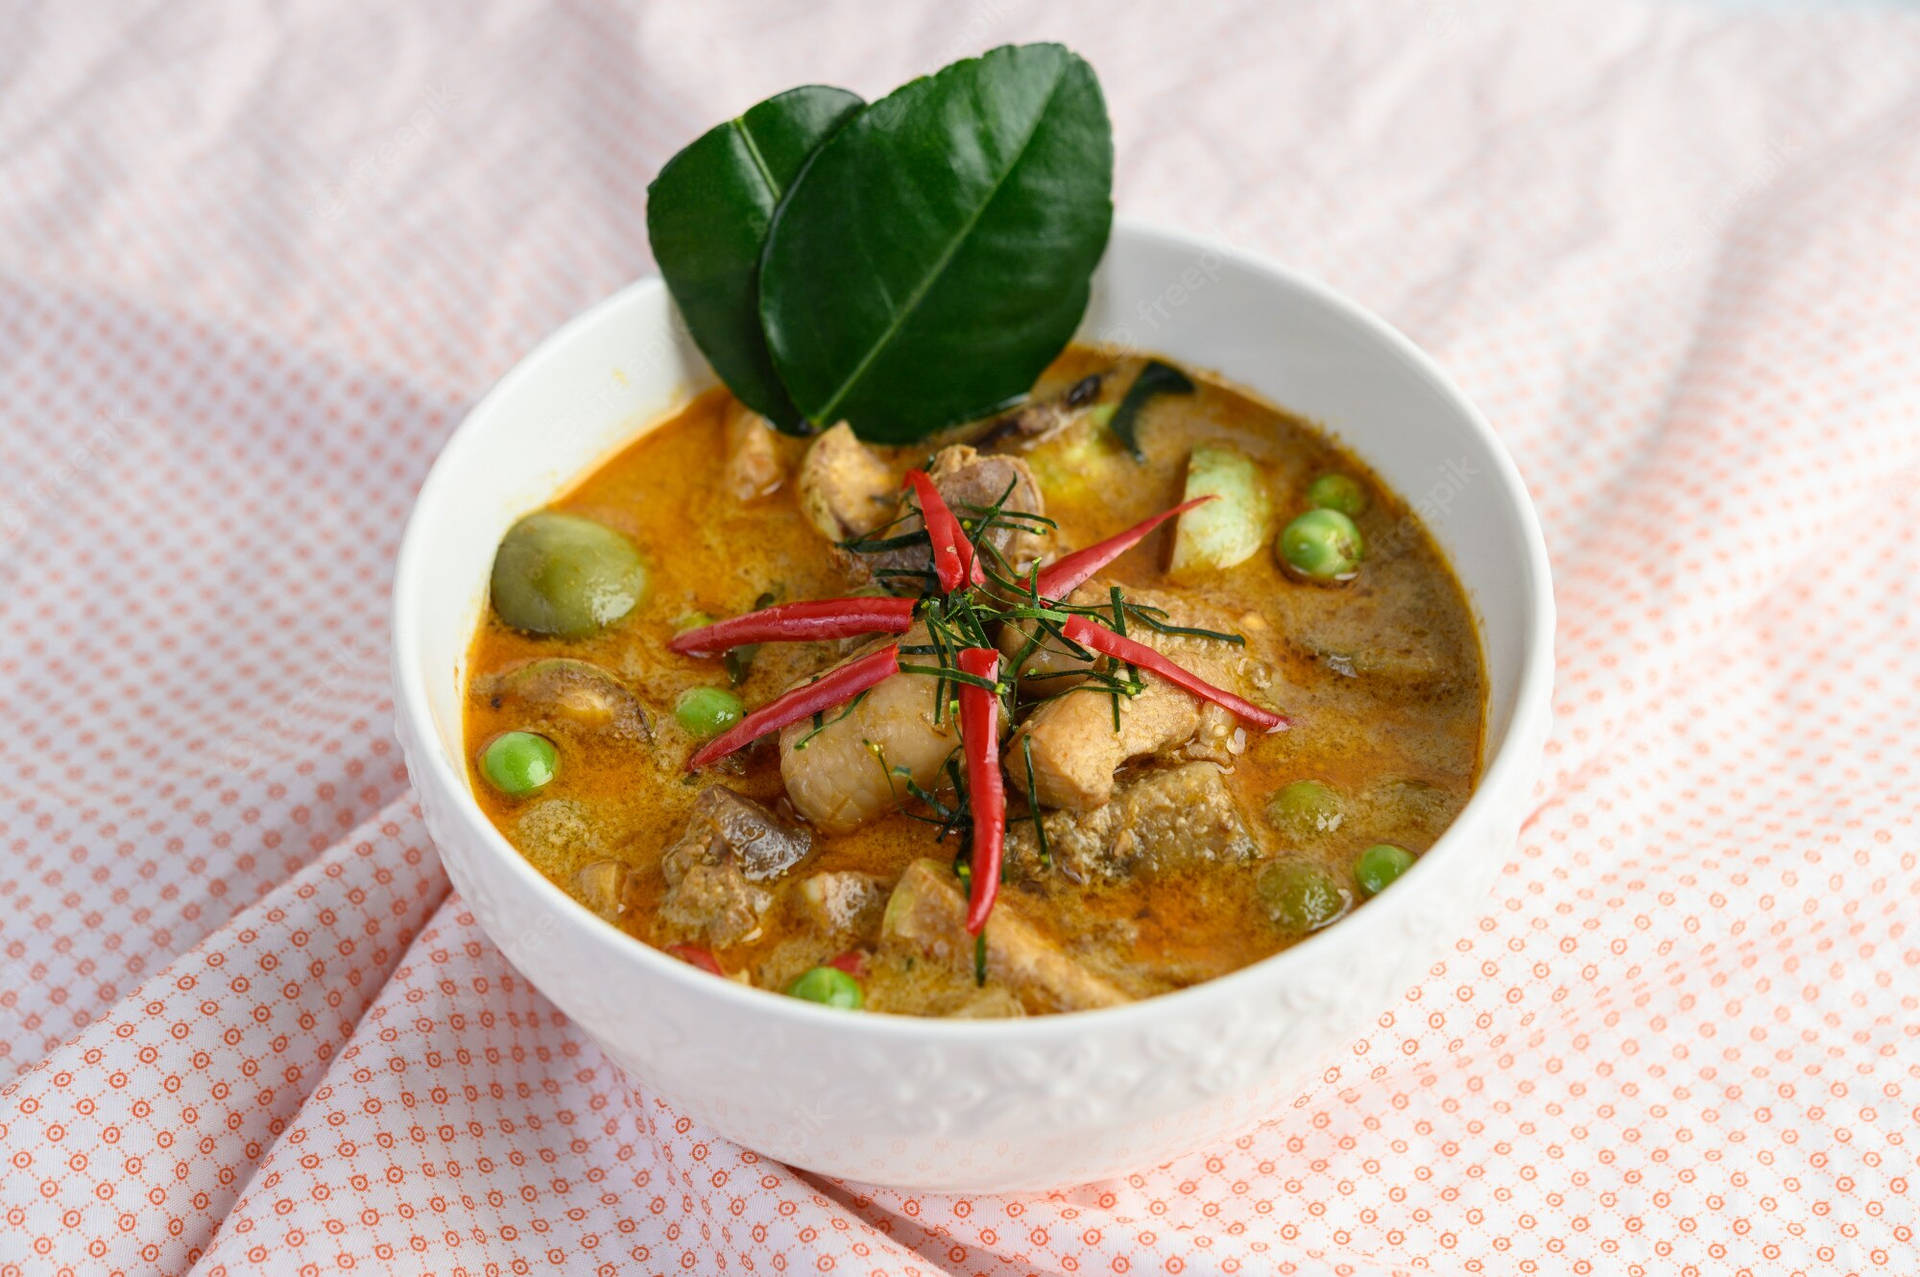 "Delectable Spicy Red Thai Curry Chicken Our Taste Buds Can't Resist" Wallpaper